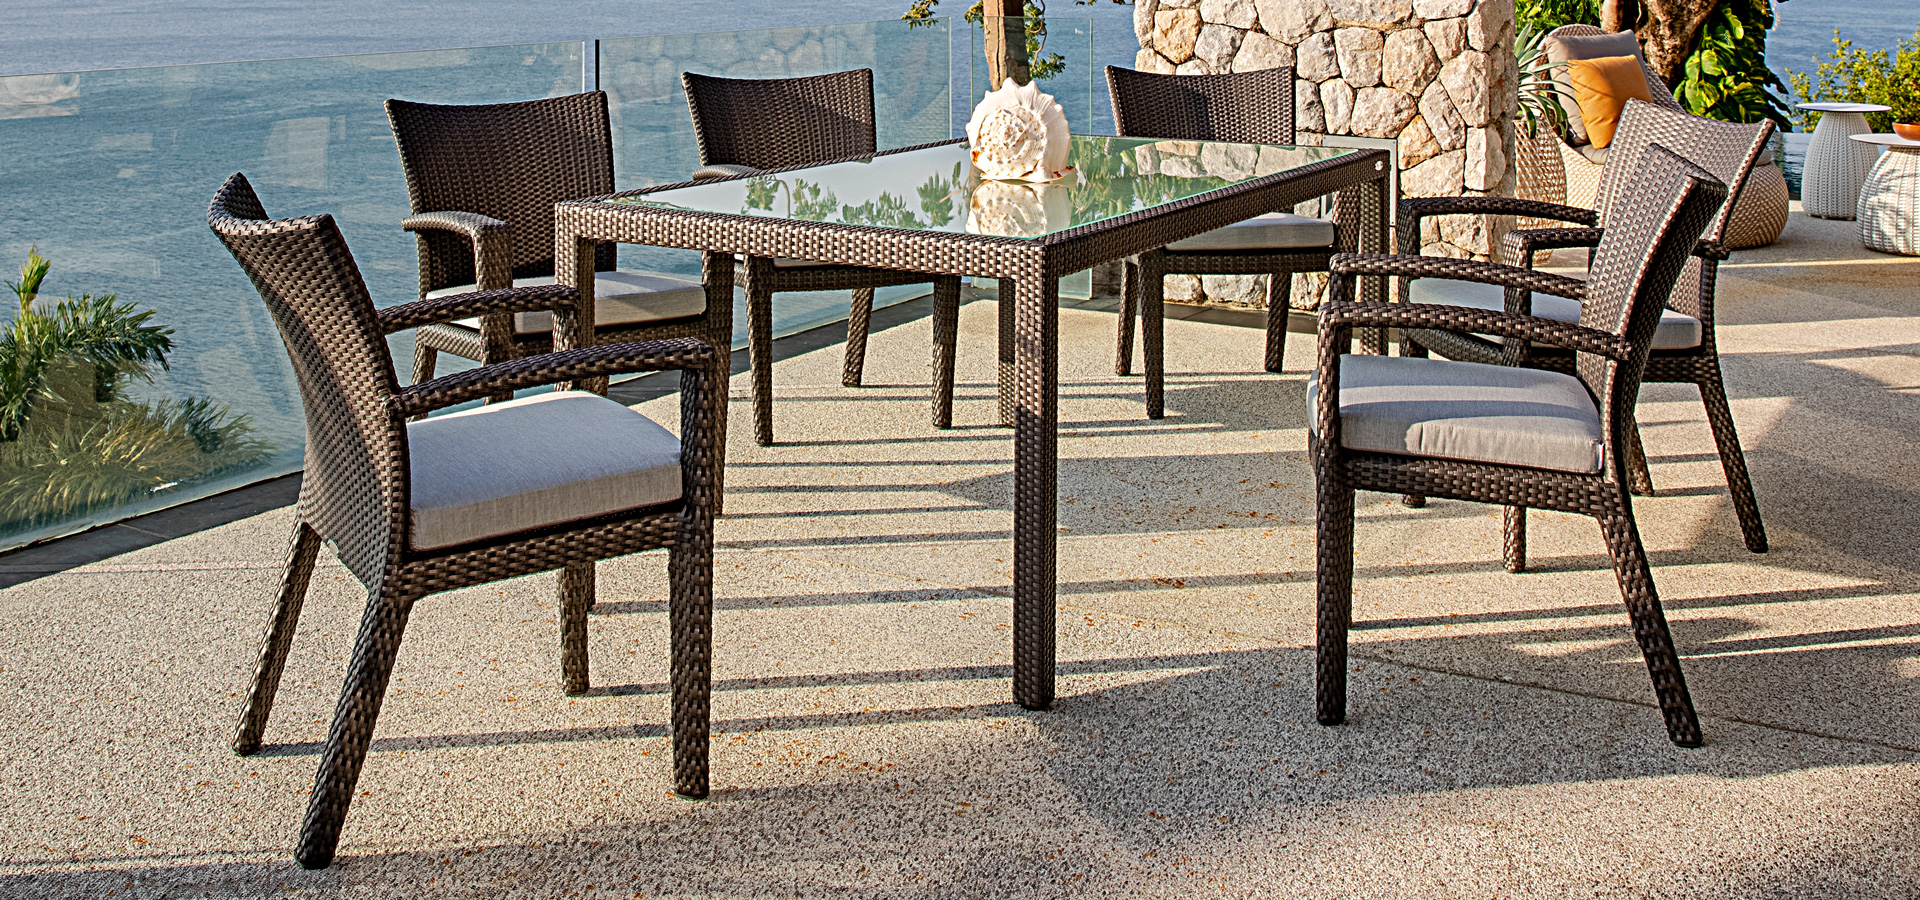 ohmm-palm-collection-outdoor-dining-set